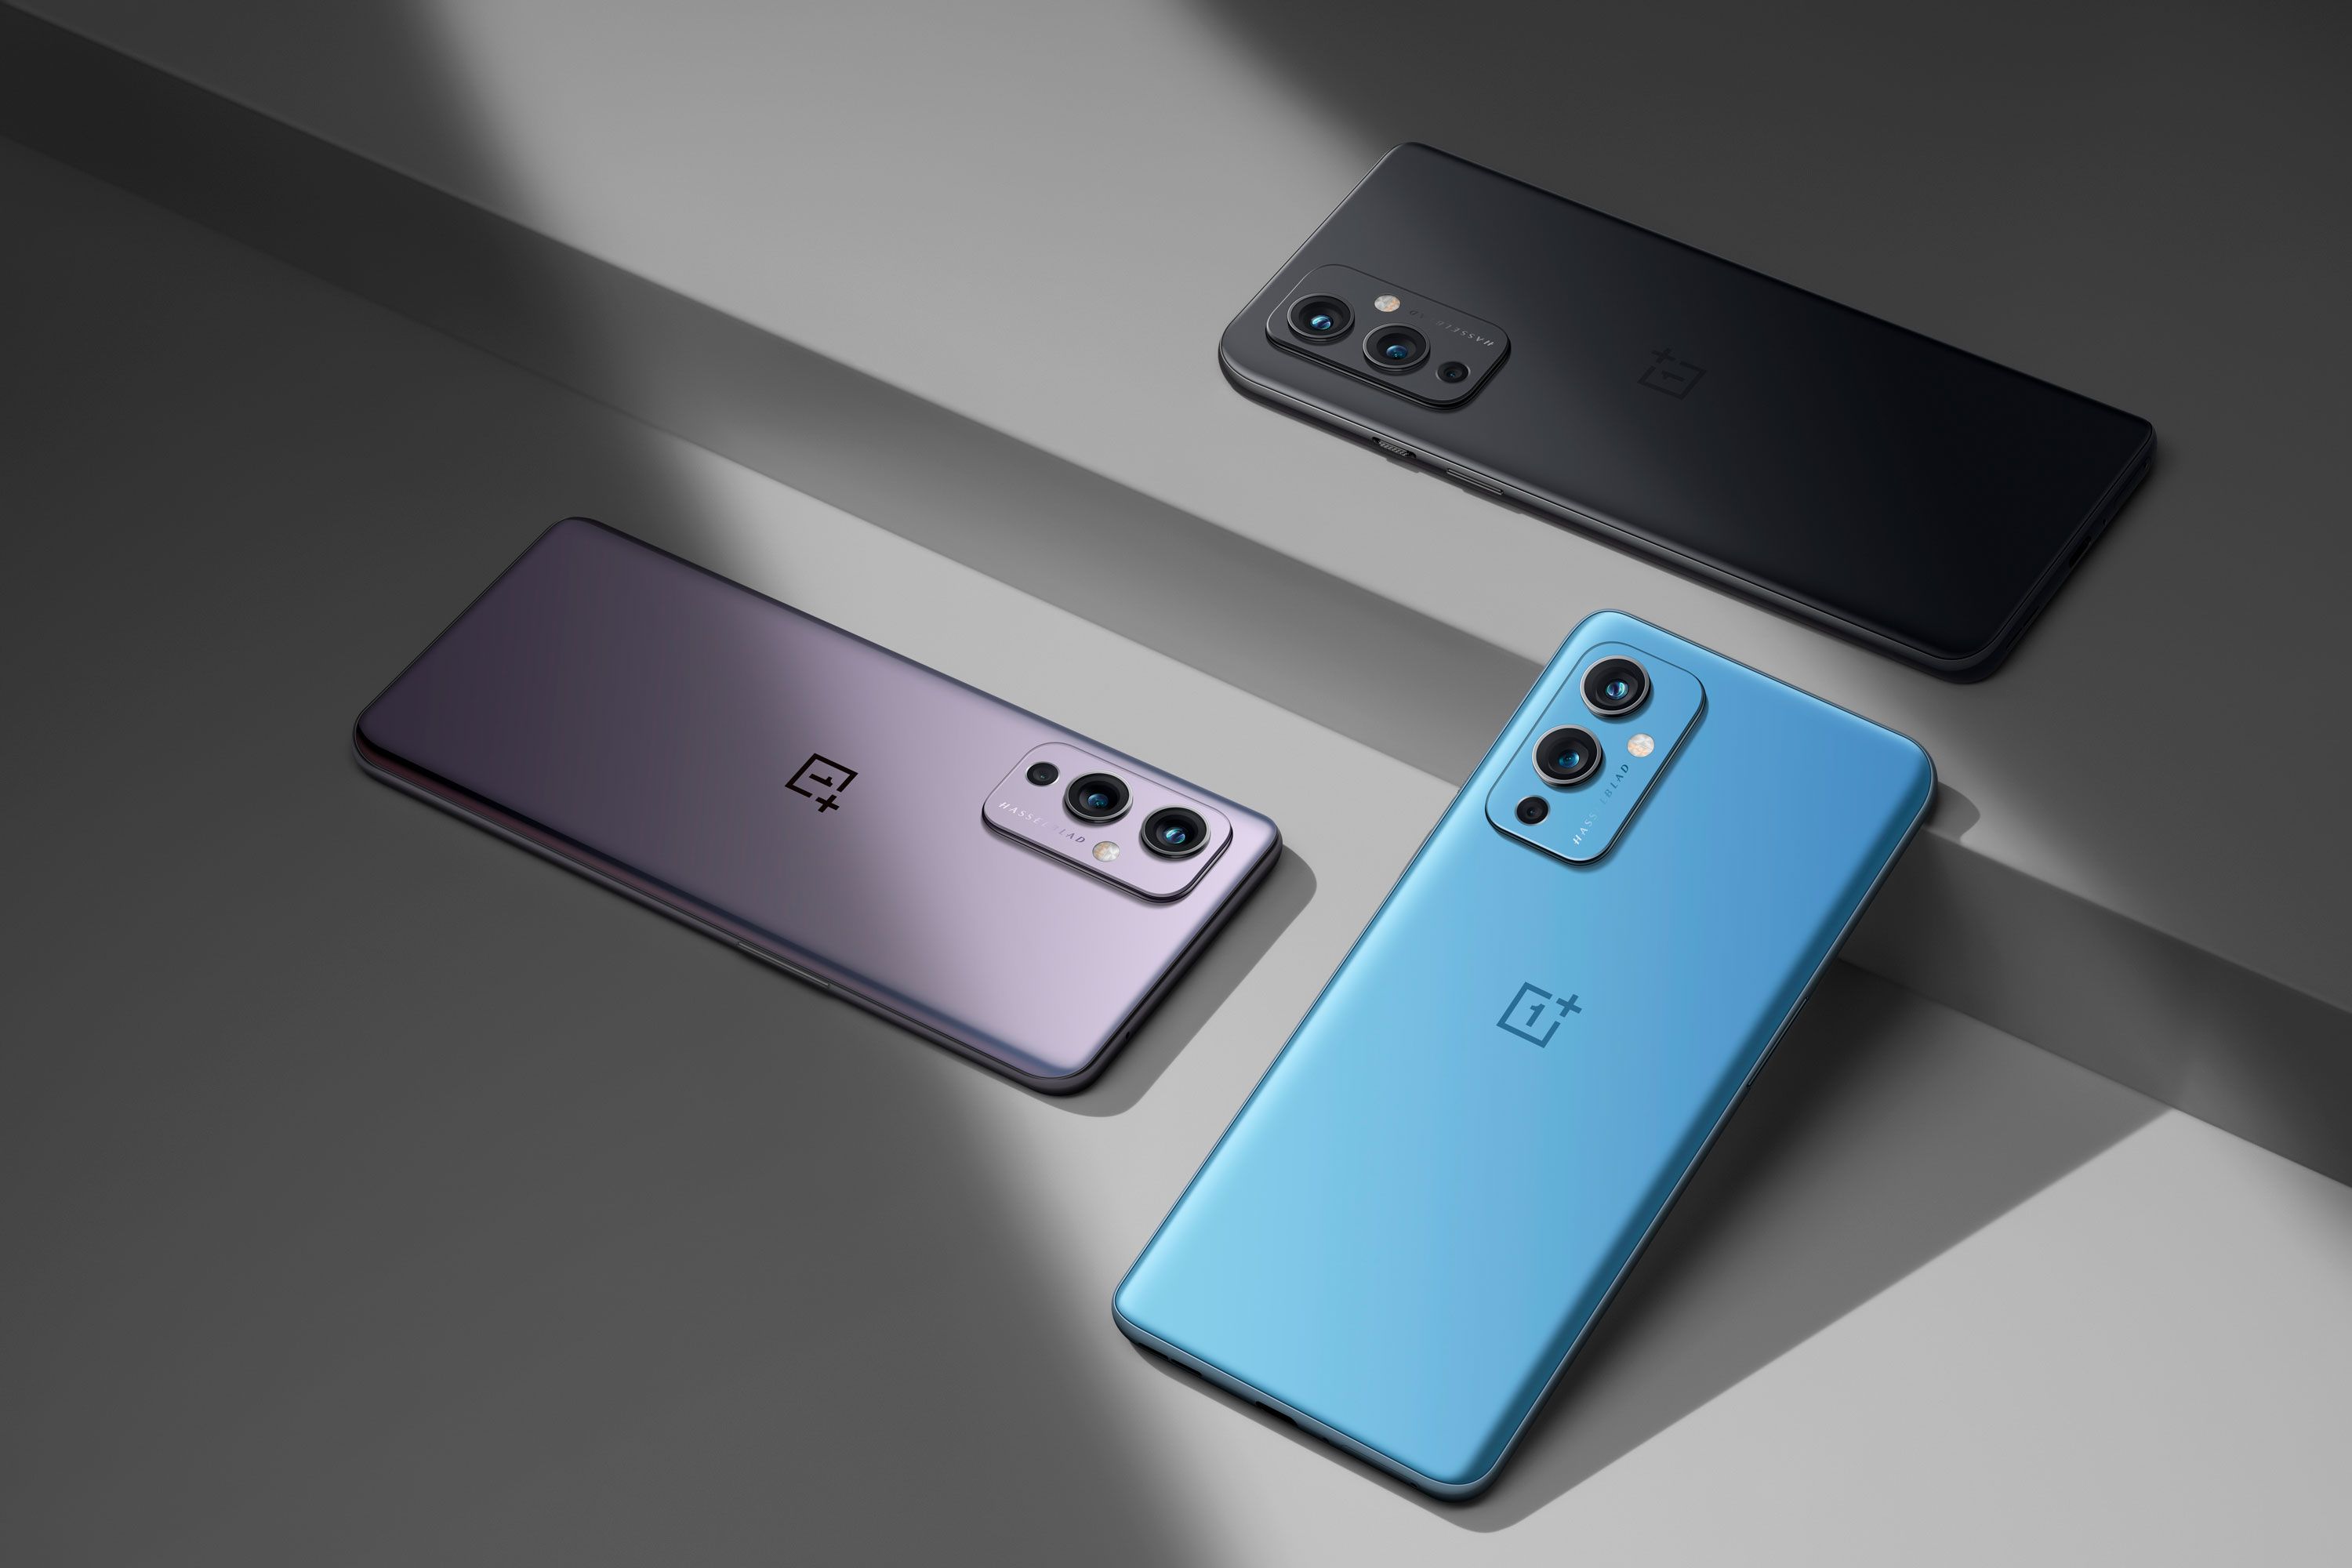 Oneplus 9 And 9r Now Available For Purchase In India Via Amazon Gizmochina